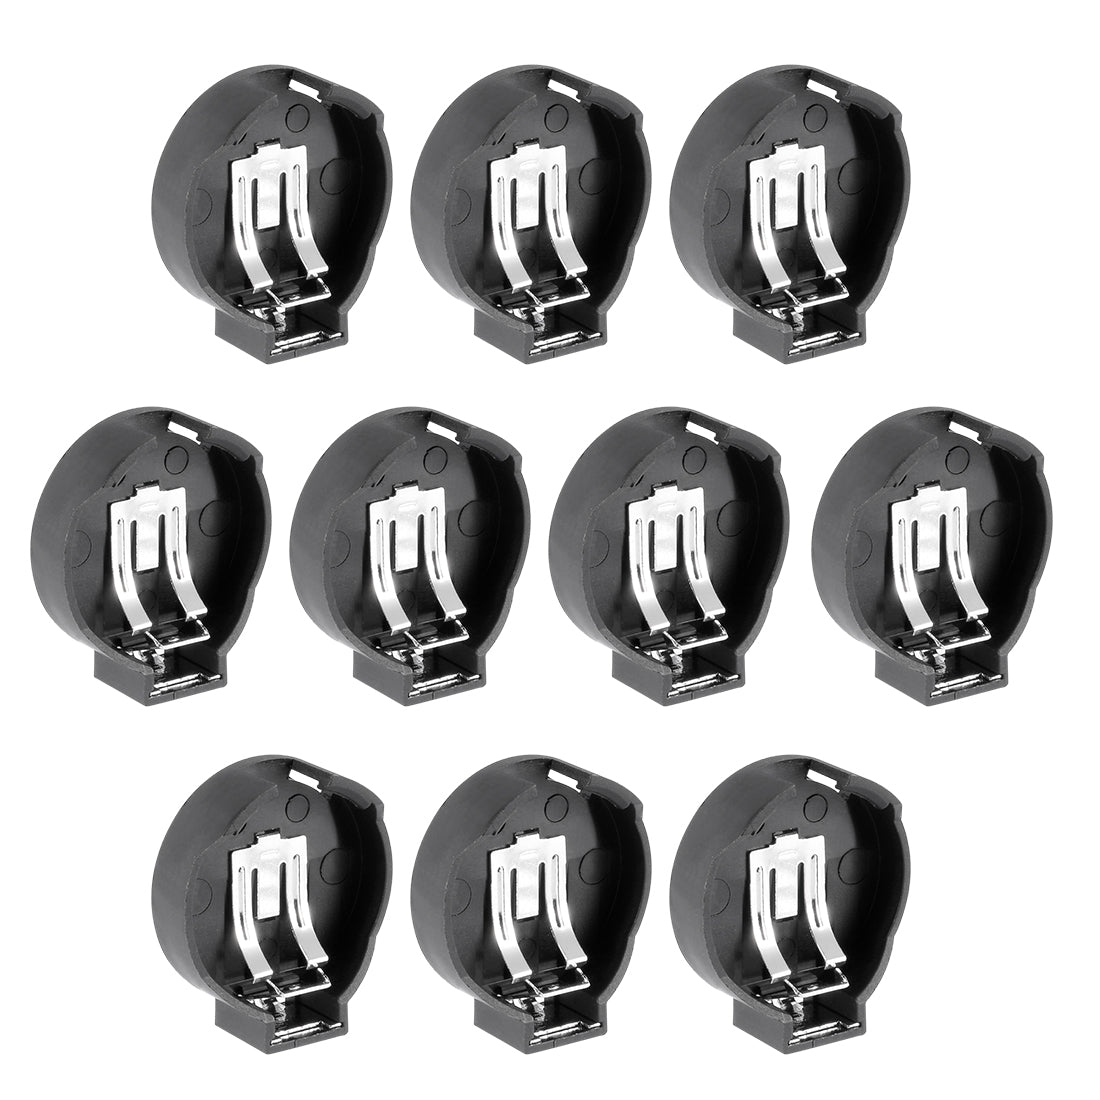 uxcell Uxcell 10 Pcs DIY CR2430 Coin Cell Button Battery Holder Socket